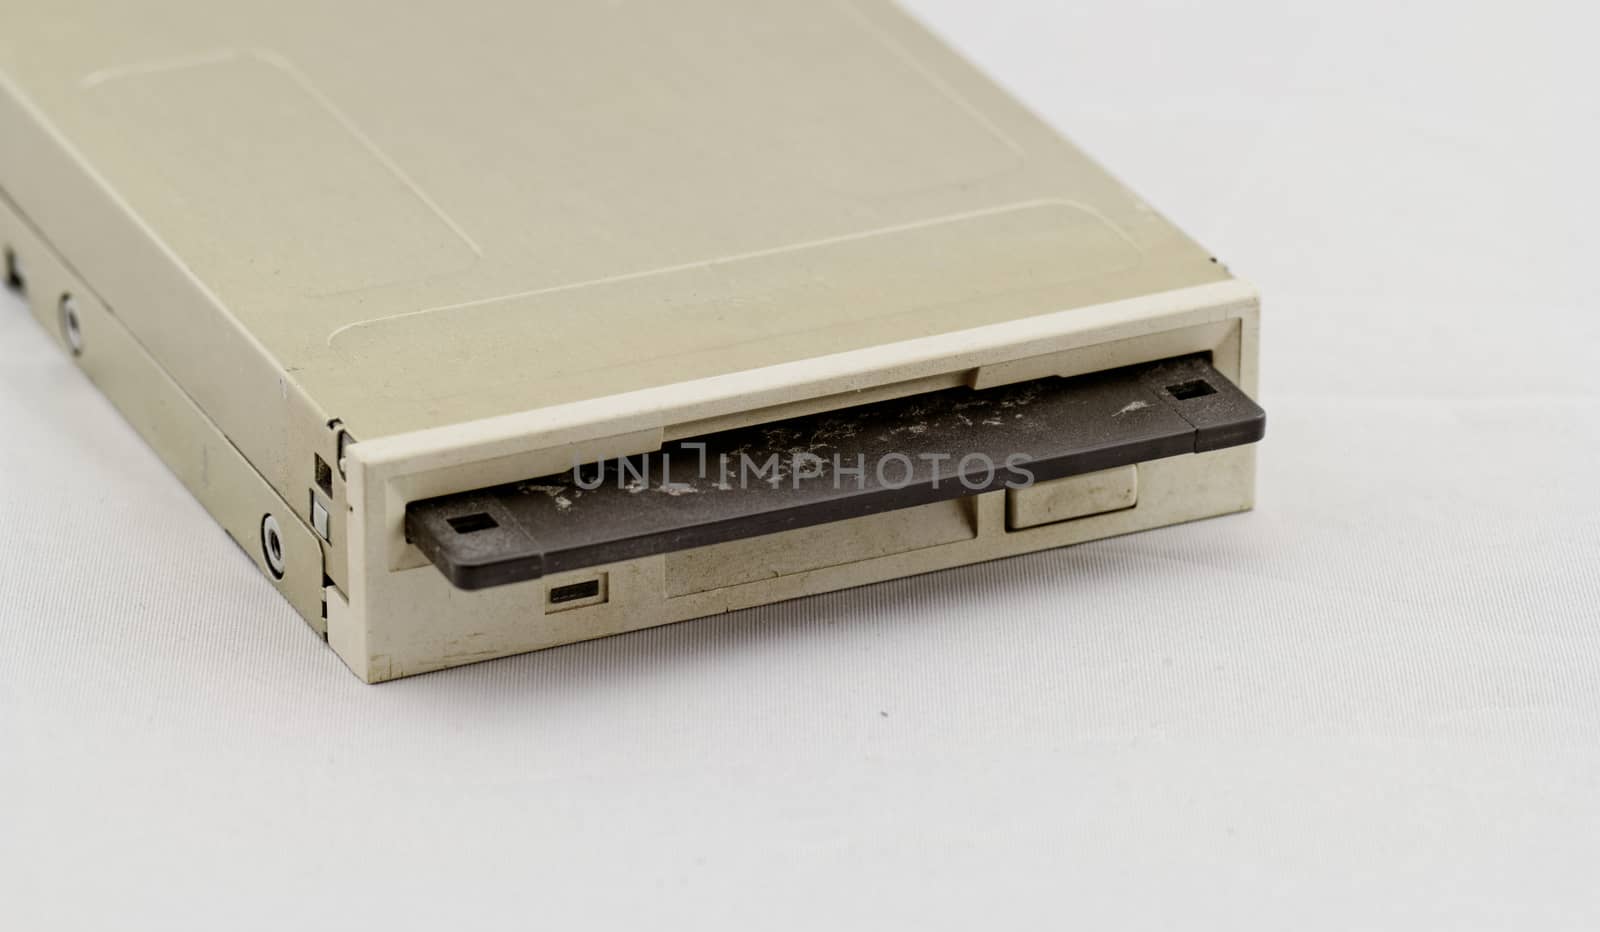 Floppy disk drive and diskette on white background